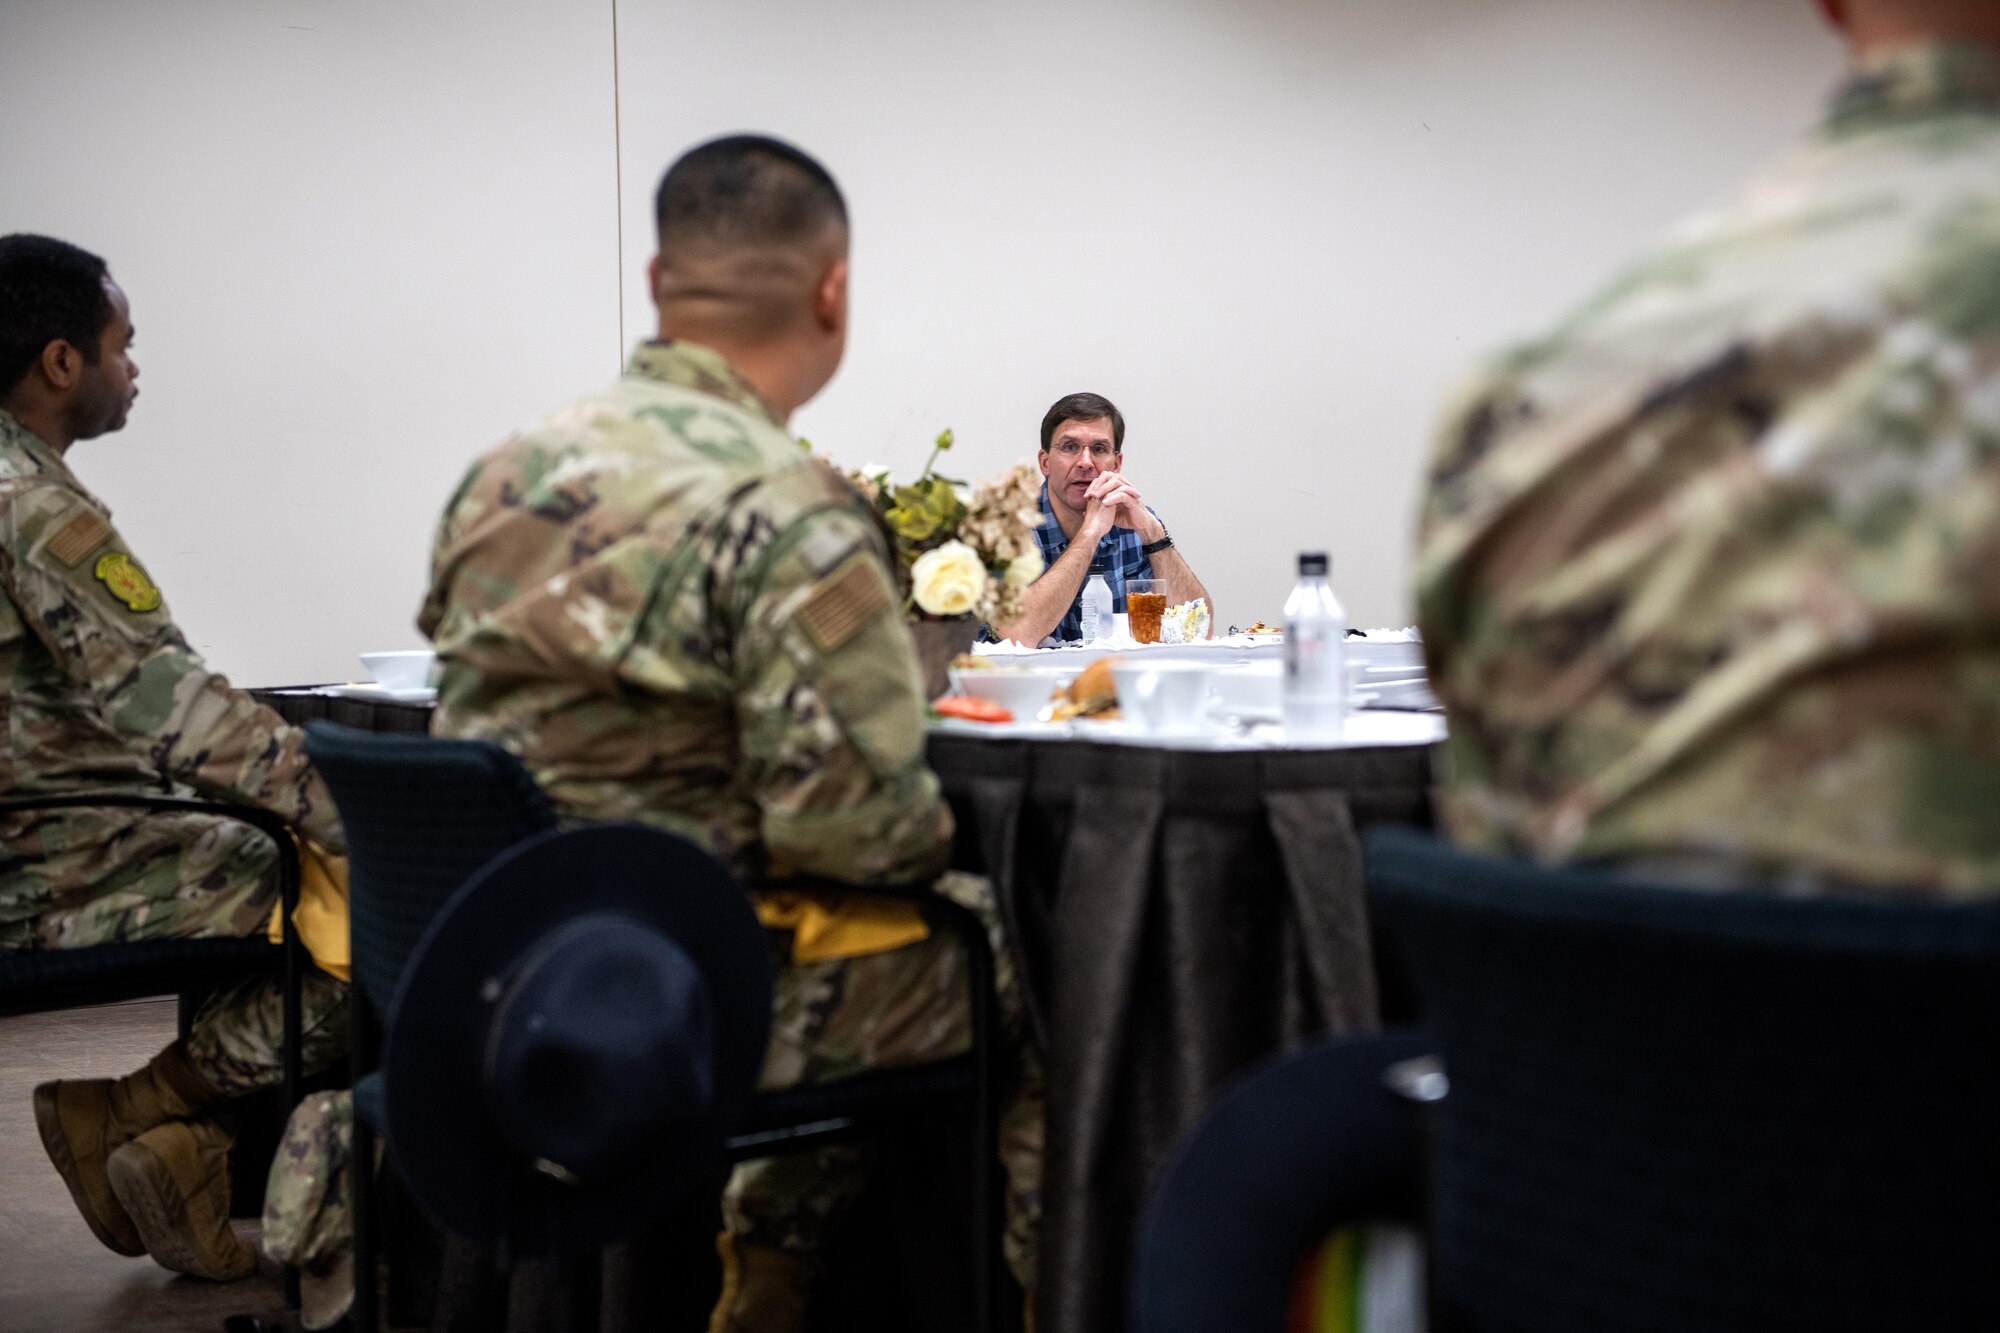 U.S. Secretary of Defense Dr. Mark T. Esper (center) meets with Noncommissioned Officers and Company Grade Officers for a working lunch during a tour of the Pfingston Reception Center June 16, 2020, at Joint Base San Antonio-Lackland, Texas. Esper met with AETC leaders to see firsthand how Basic Military Training is fighting through COVID-19 with health protection measures in place and adapting operations to current Centers for Disease Control and Prevention Guidance. The visit also allowed him to witness how a citizen becomes an Airman during COVID-19. (U.S. Air Force photo by Sarayuth Pinthong)